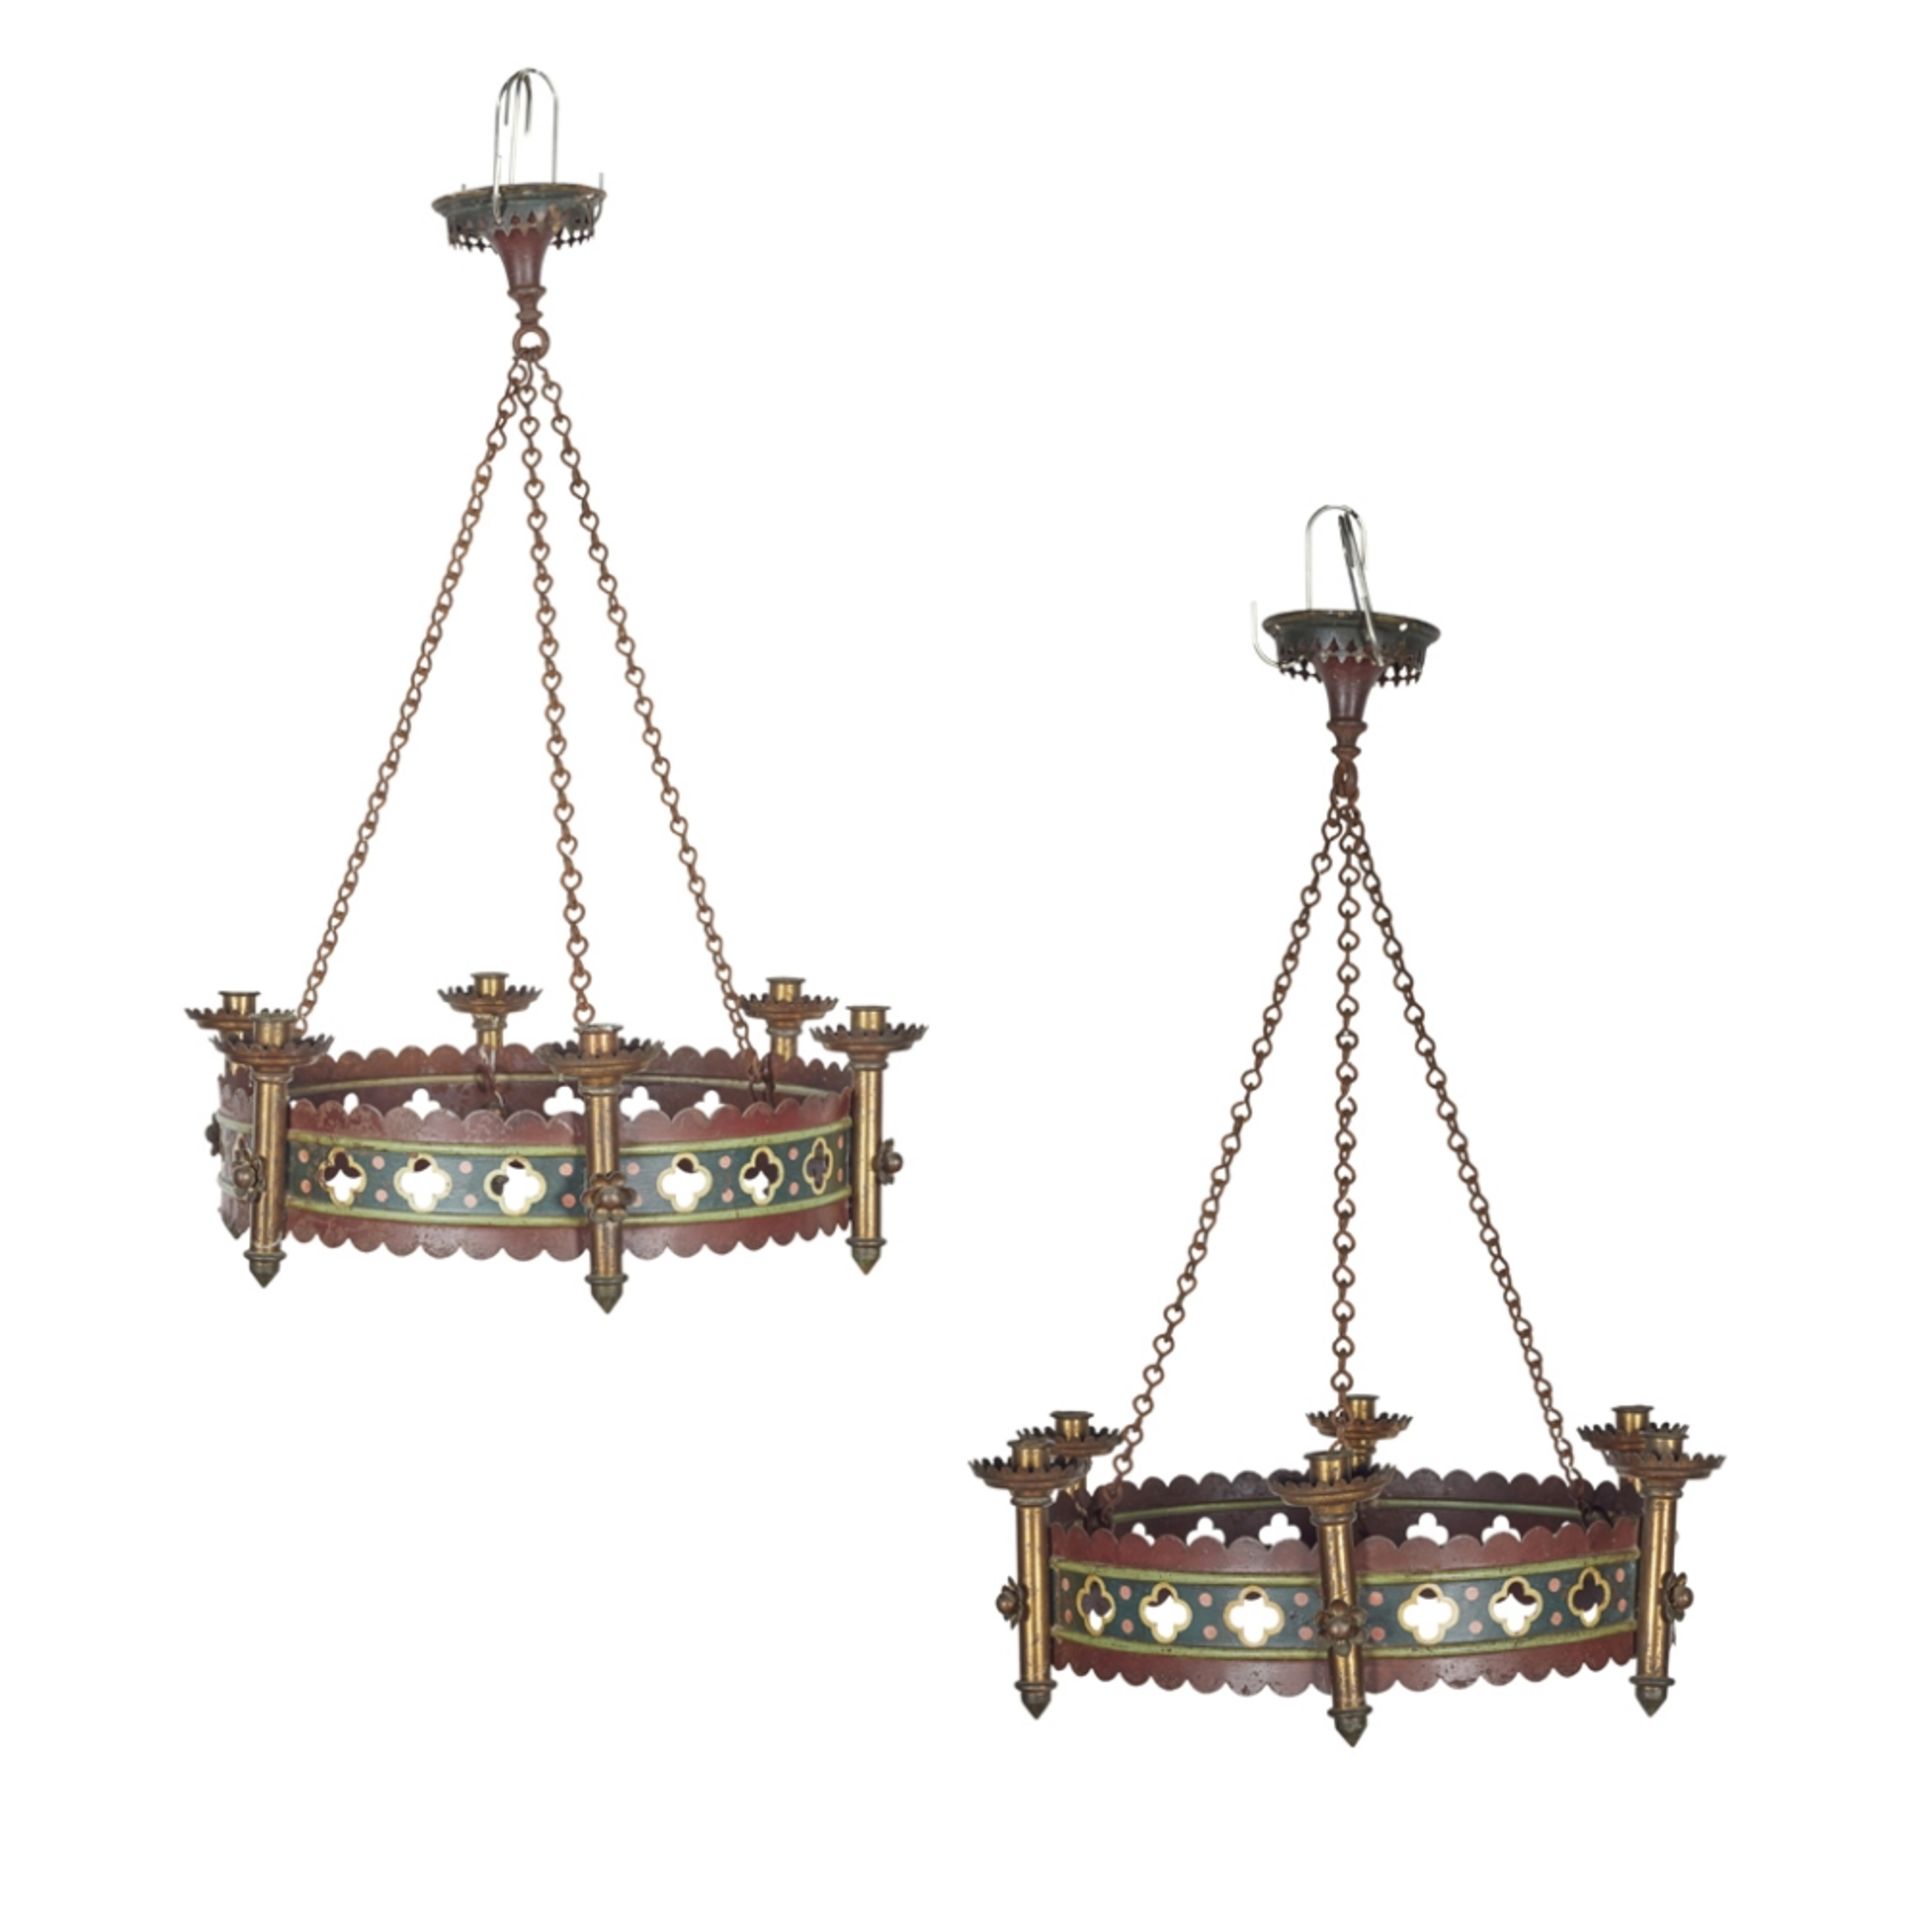 AUGUSTUS WELBY NORTHMORE PUGIN (1812-1852)PAIR OF GOTHIC REVIVAL PAINTED IRON AND BRASS MOUNTED